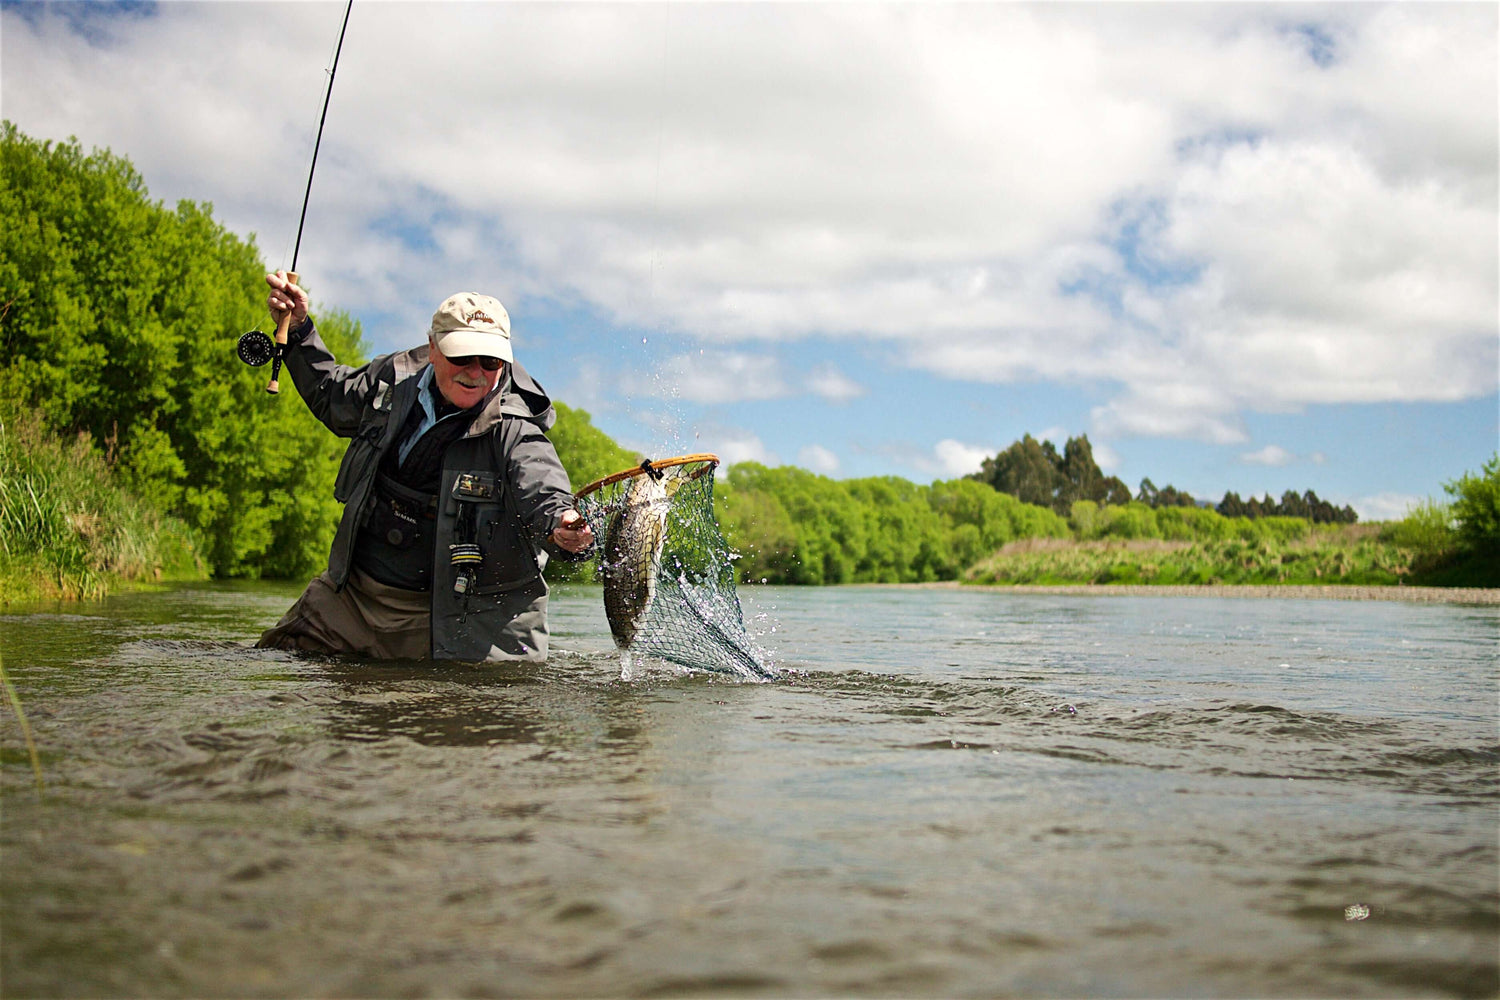 How To Choose the Best Fly Rod for Your Fly Fishing